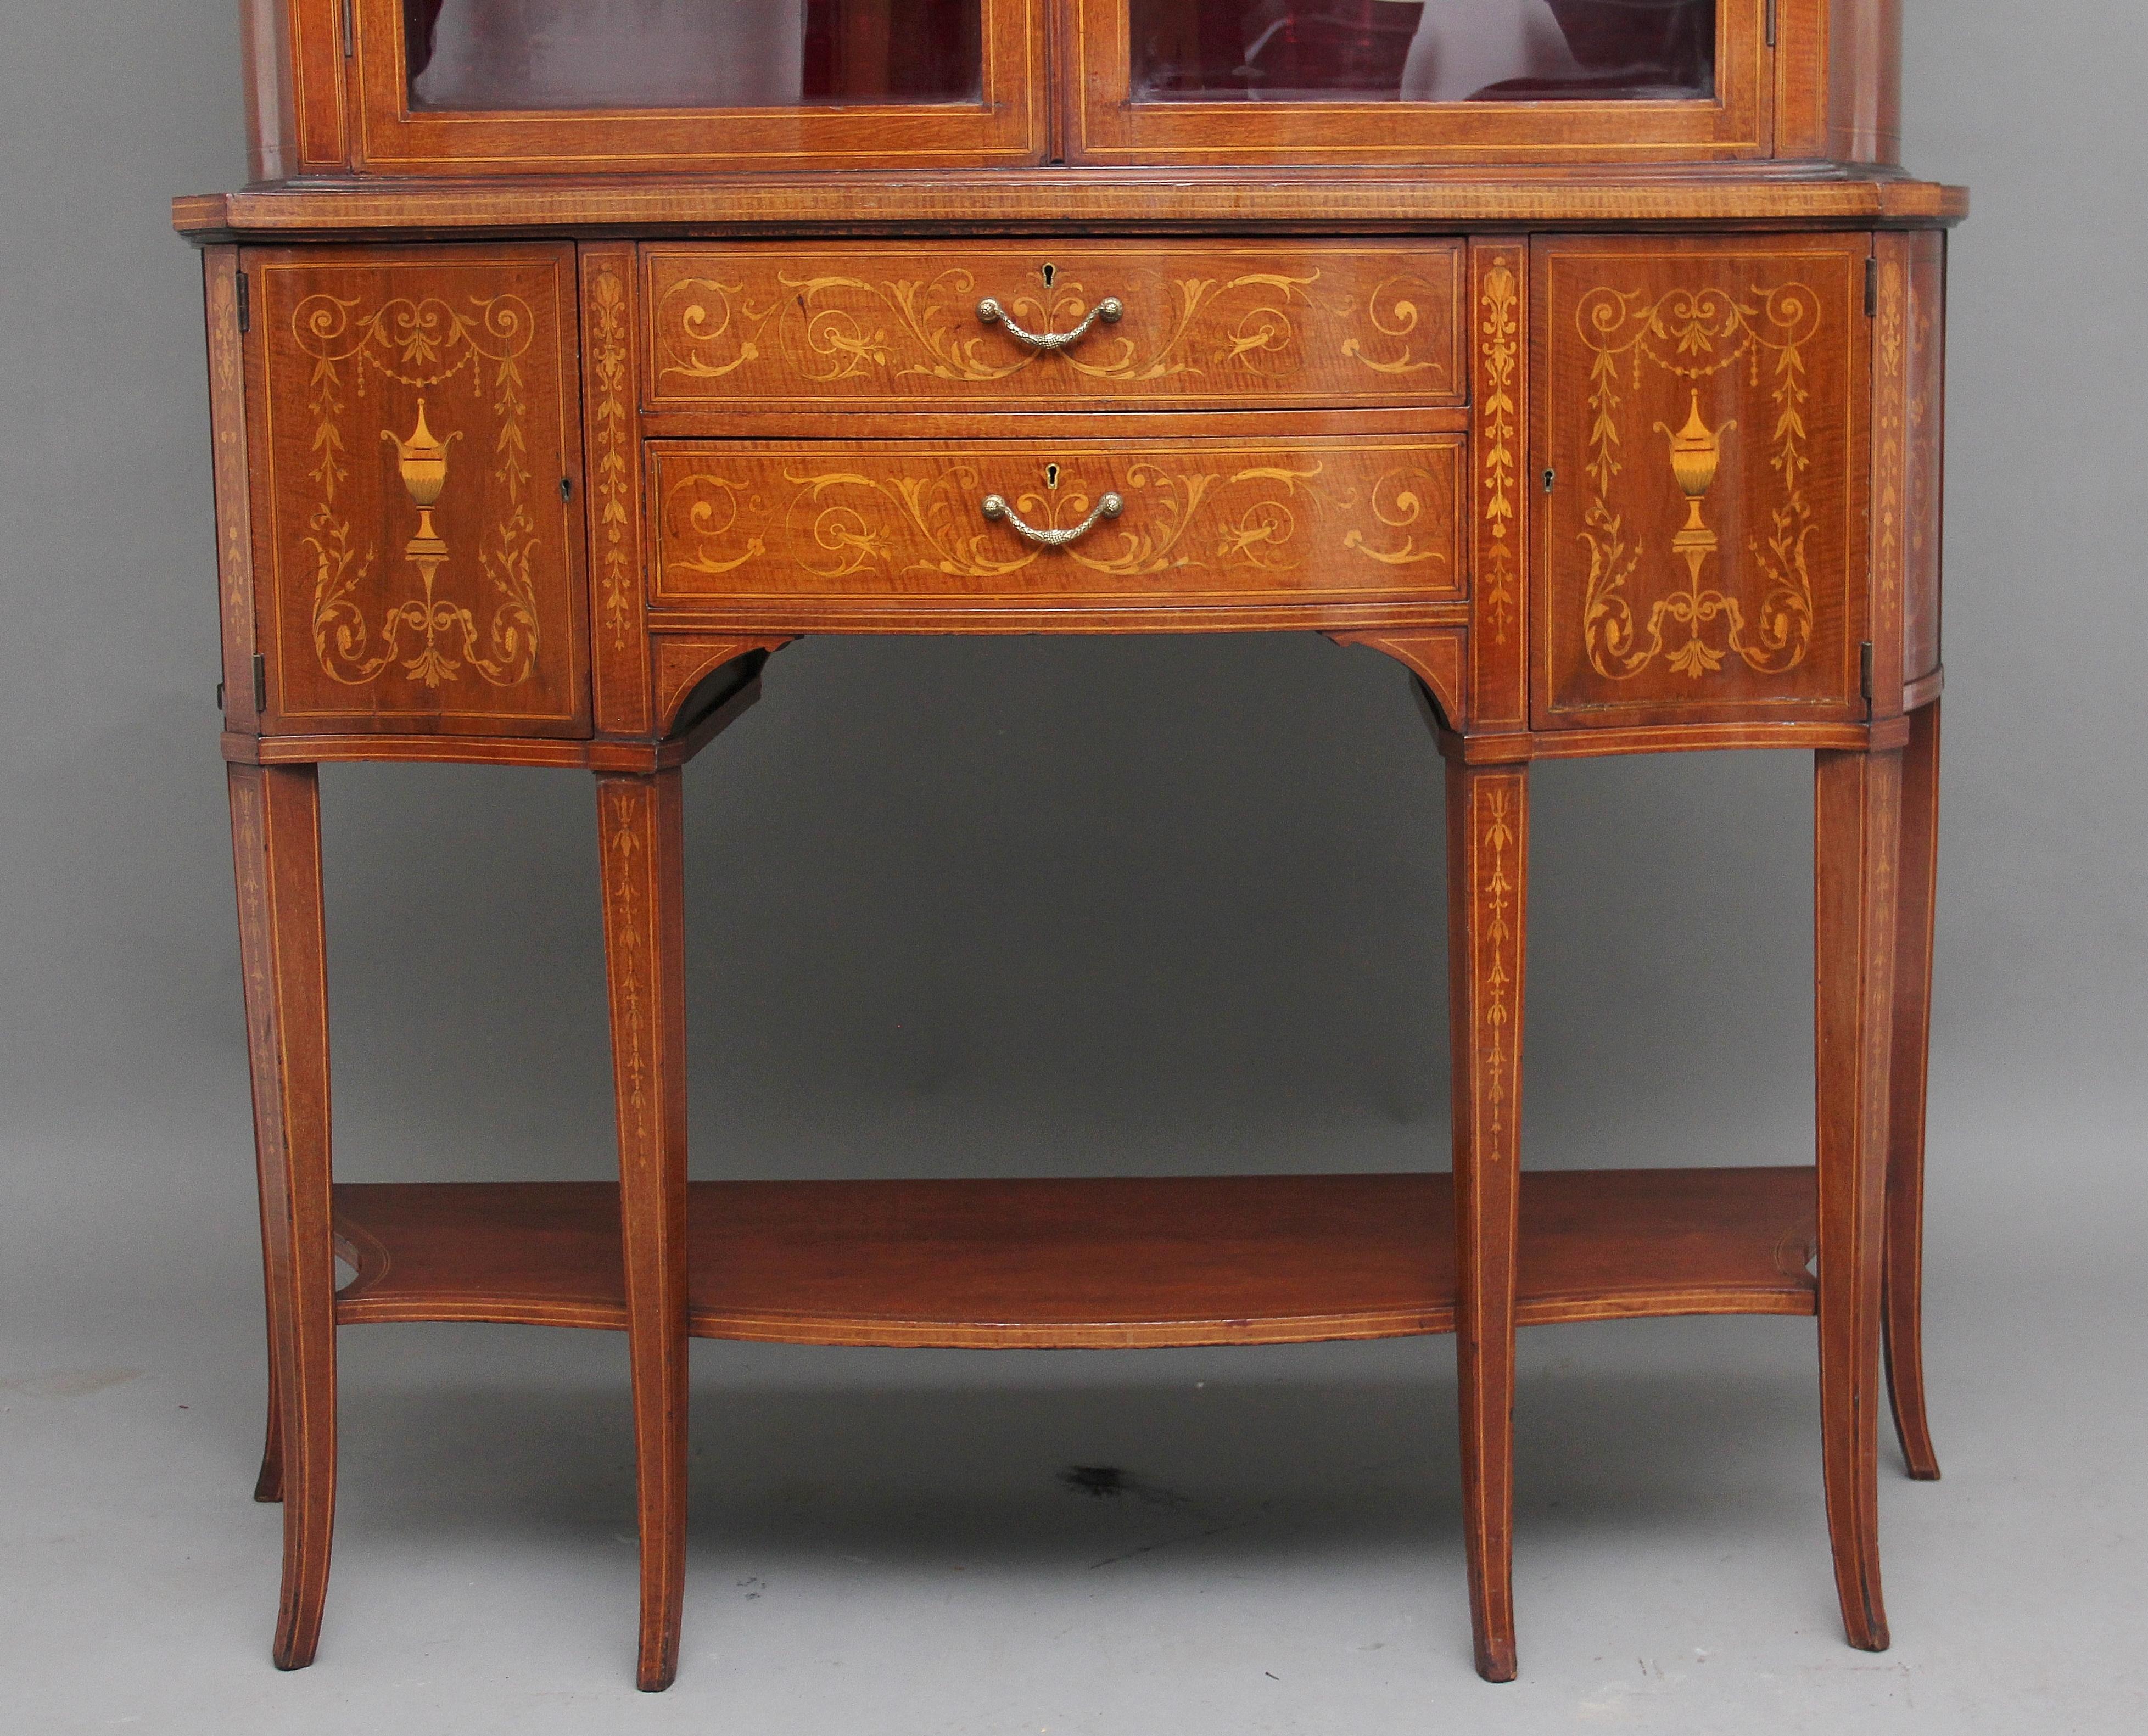 19th Century Inlaid Mahogany Display Cabinet In Good Condition For Sale In Martlesham, GB